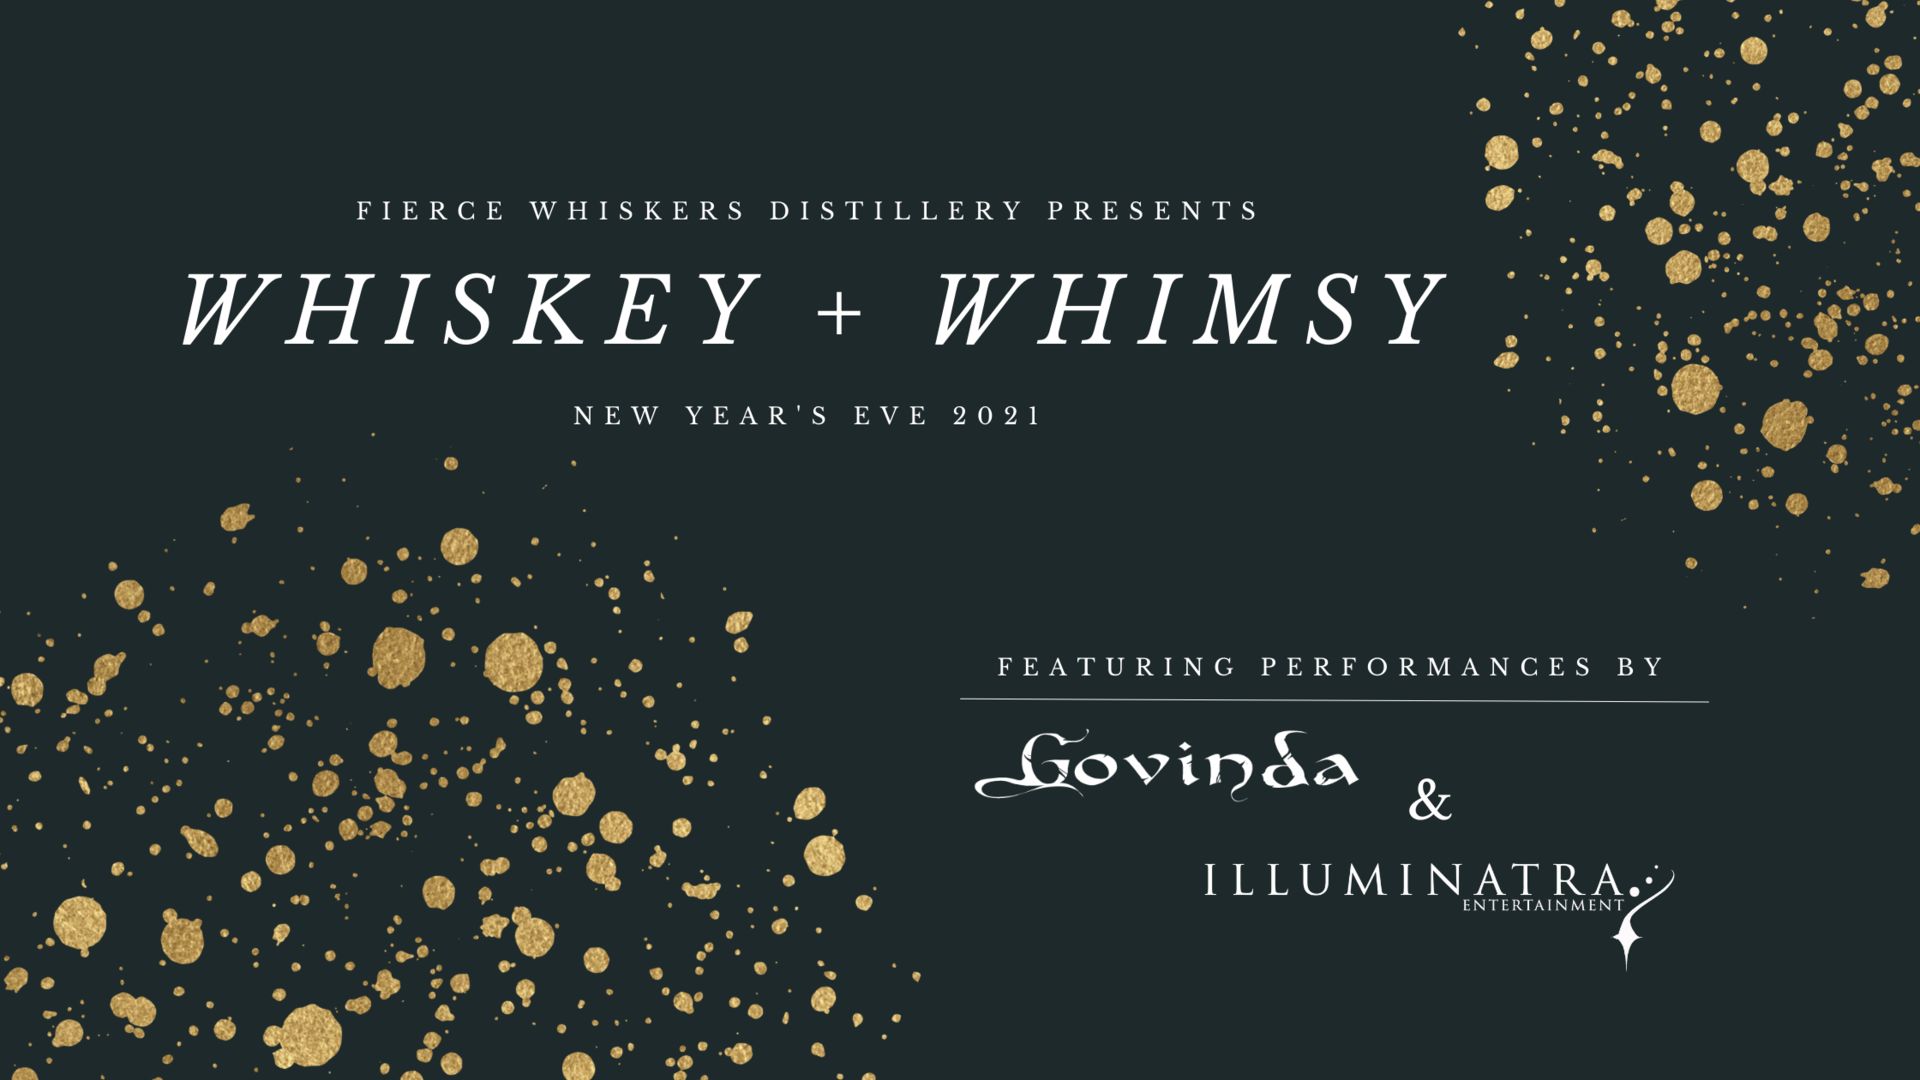 Whiskey + Whimsy: NYE 2021 at Fierce Whiskers Distillery, Austin, Texas, United States